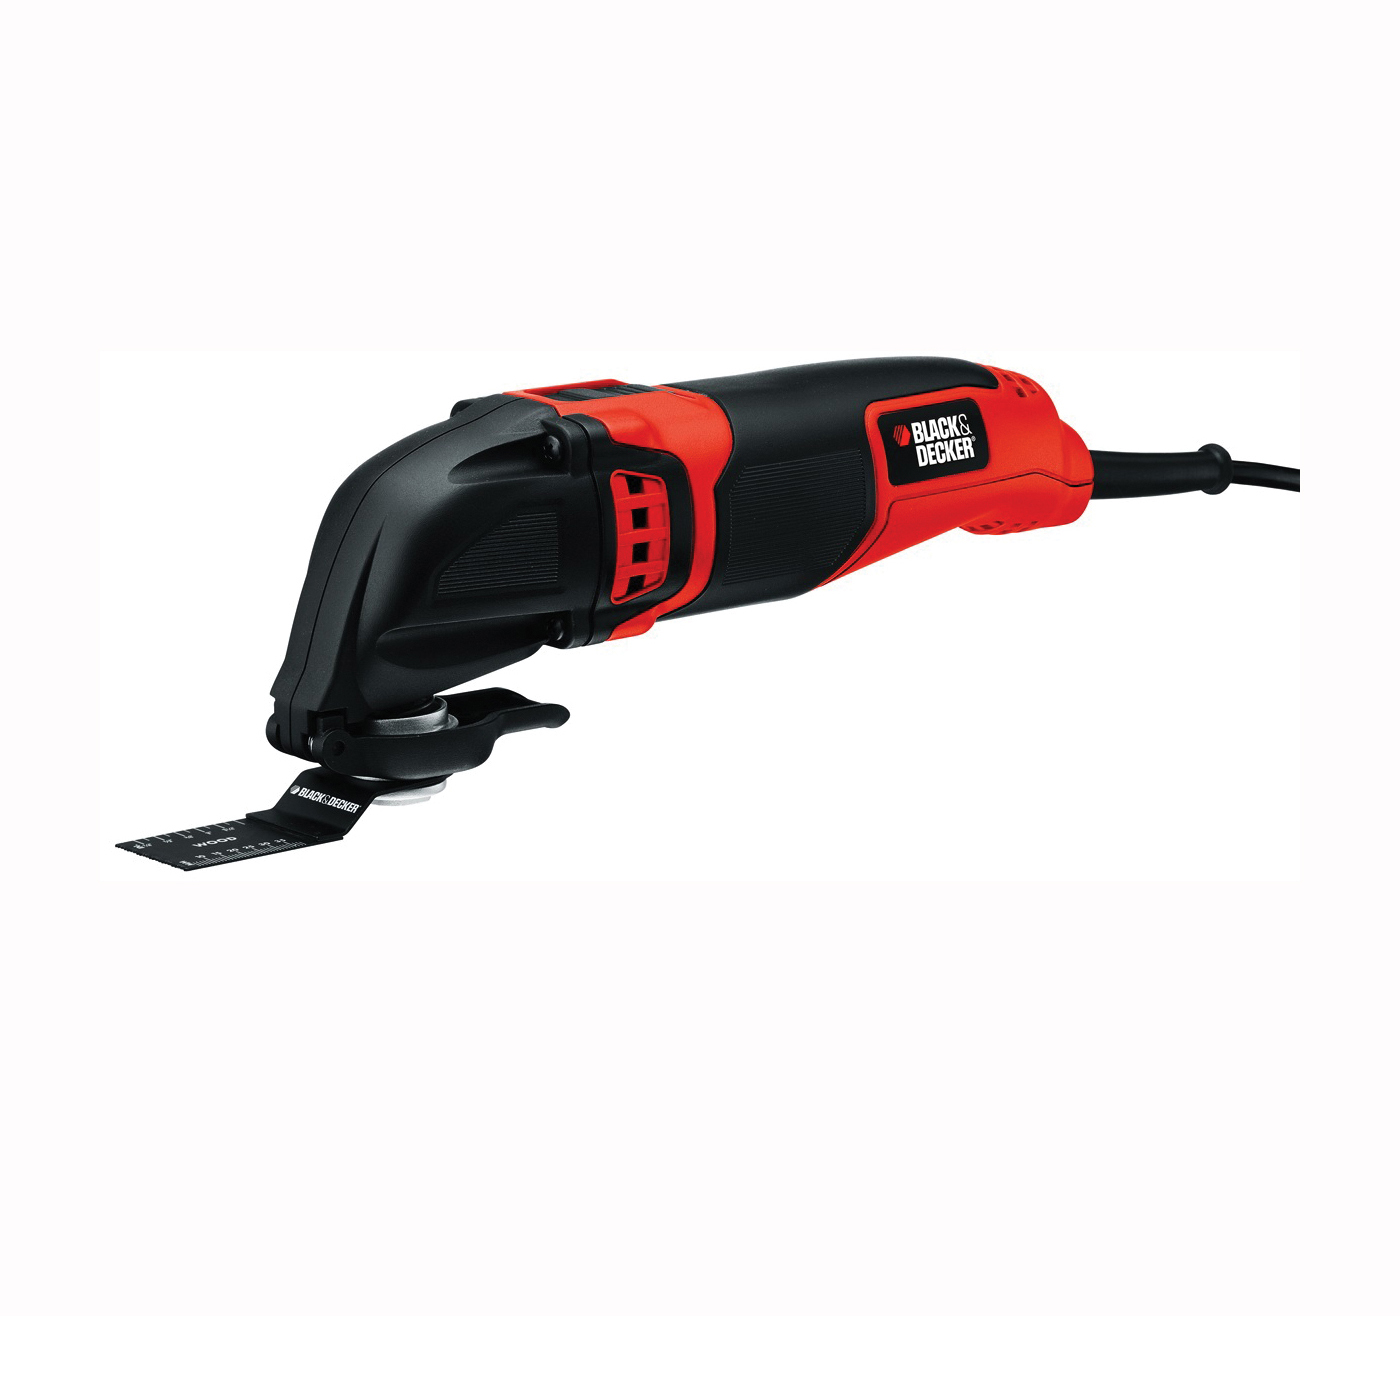 BD200MTB Oscillating Multi-Tool, 2 A, 10,000 to 20,000 rpm Speed